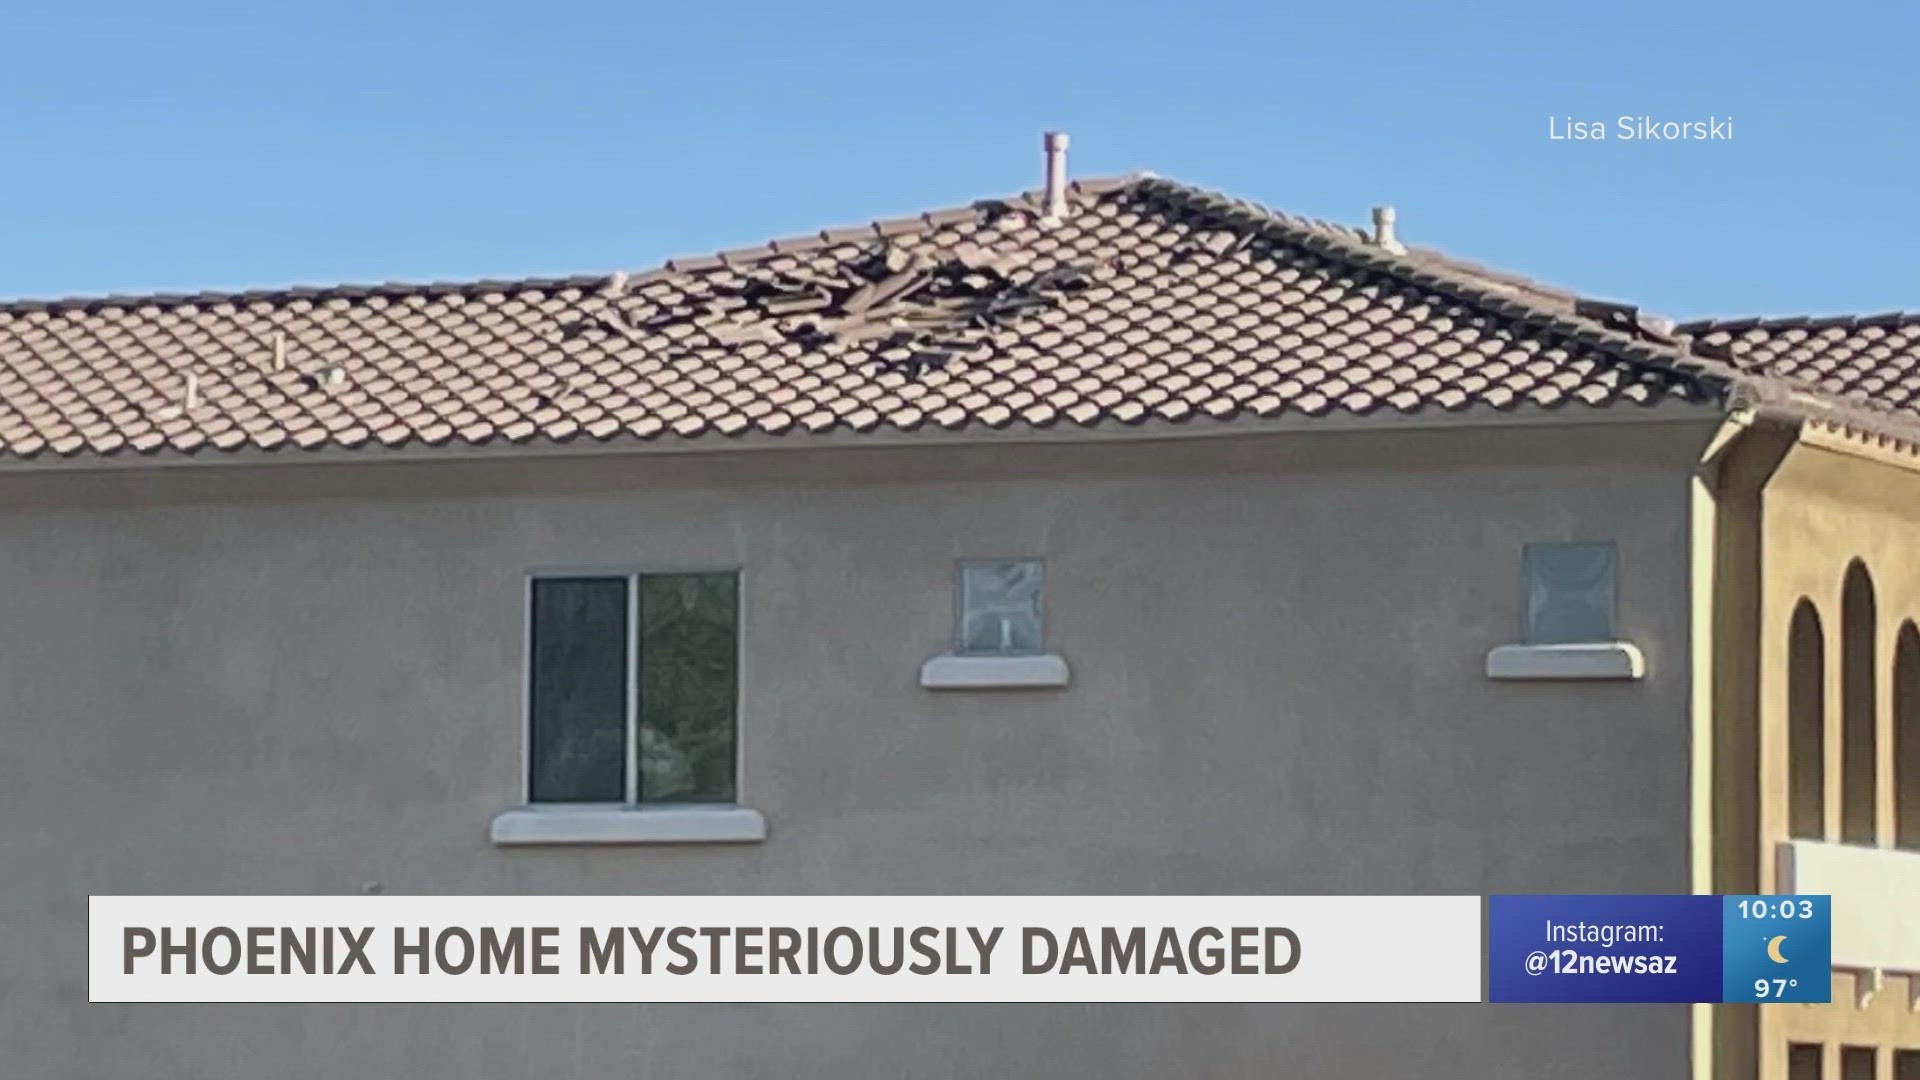 The homeowner said the damage happened just after it felt like an earthquake shook the house.